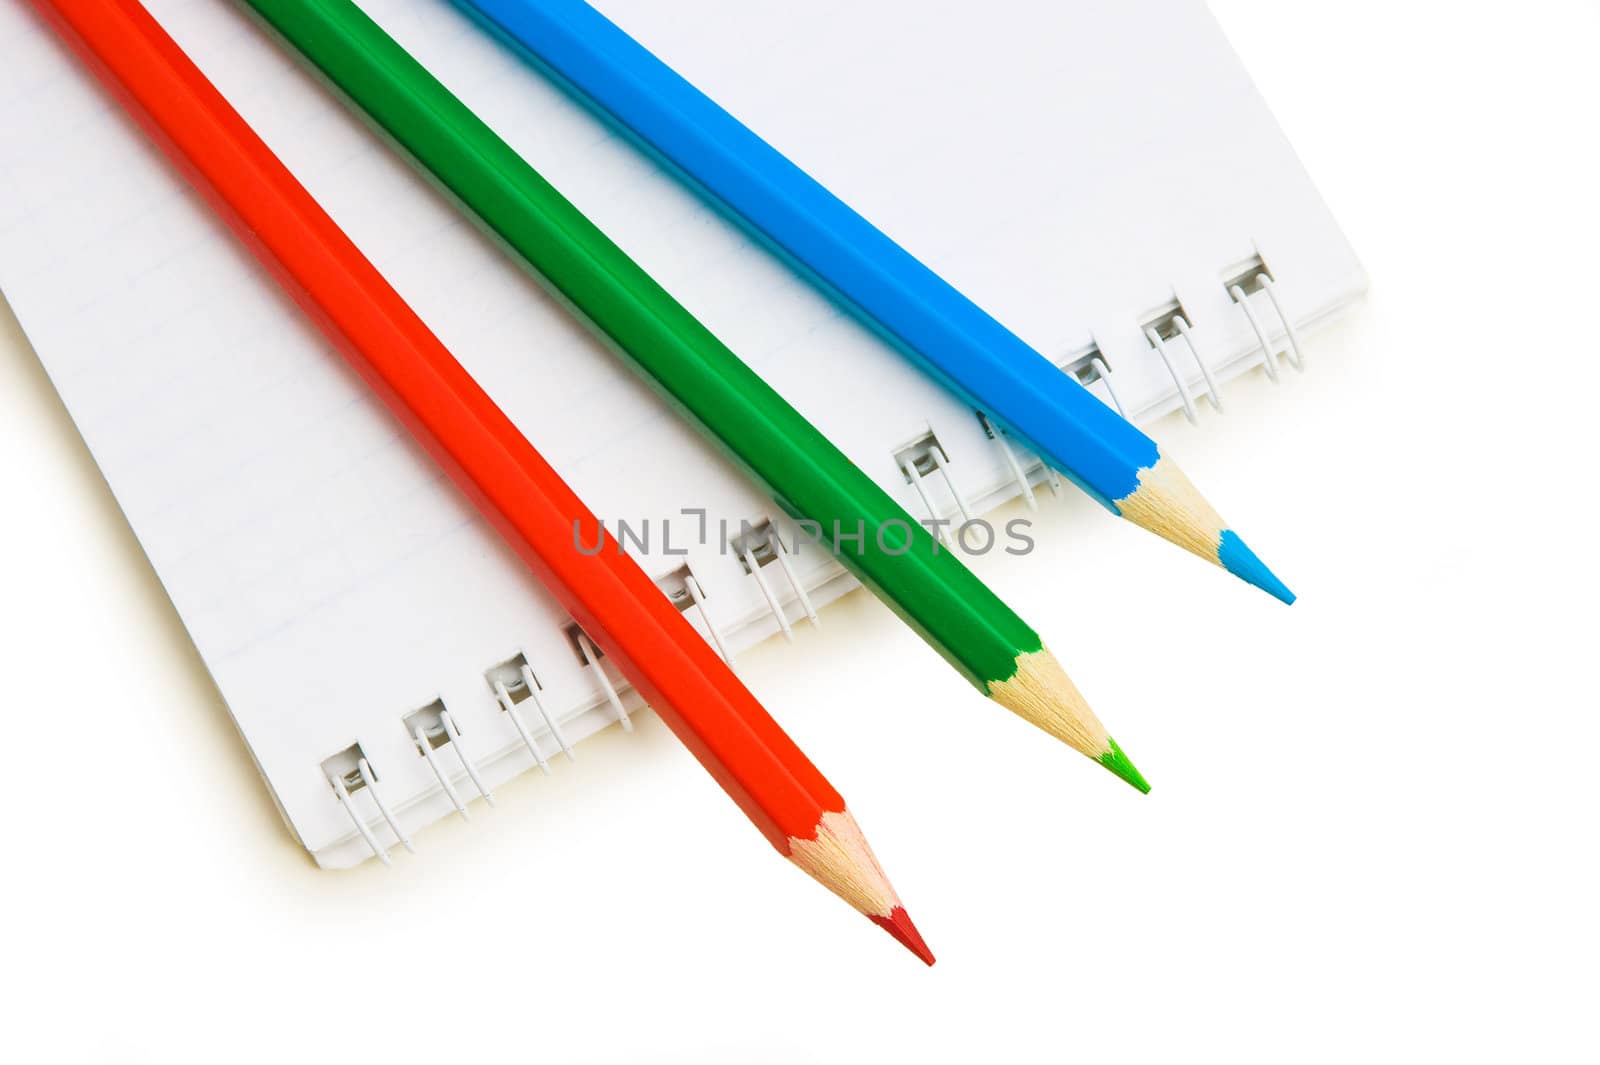 Pencils and notepad isolated on white background